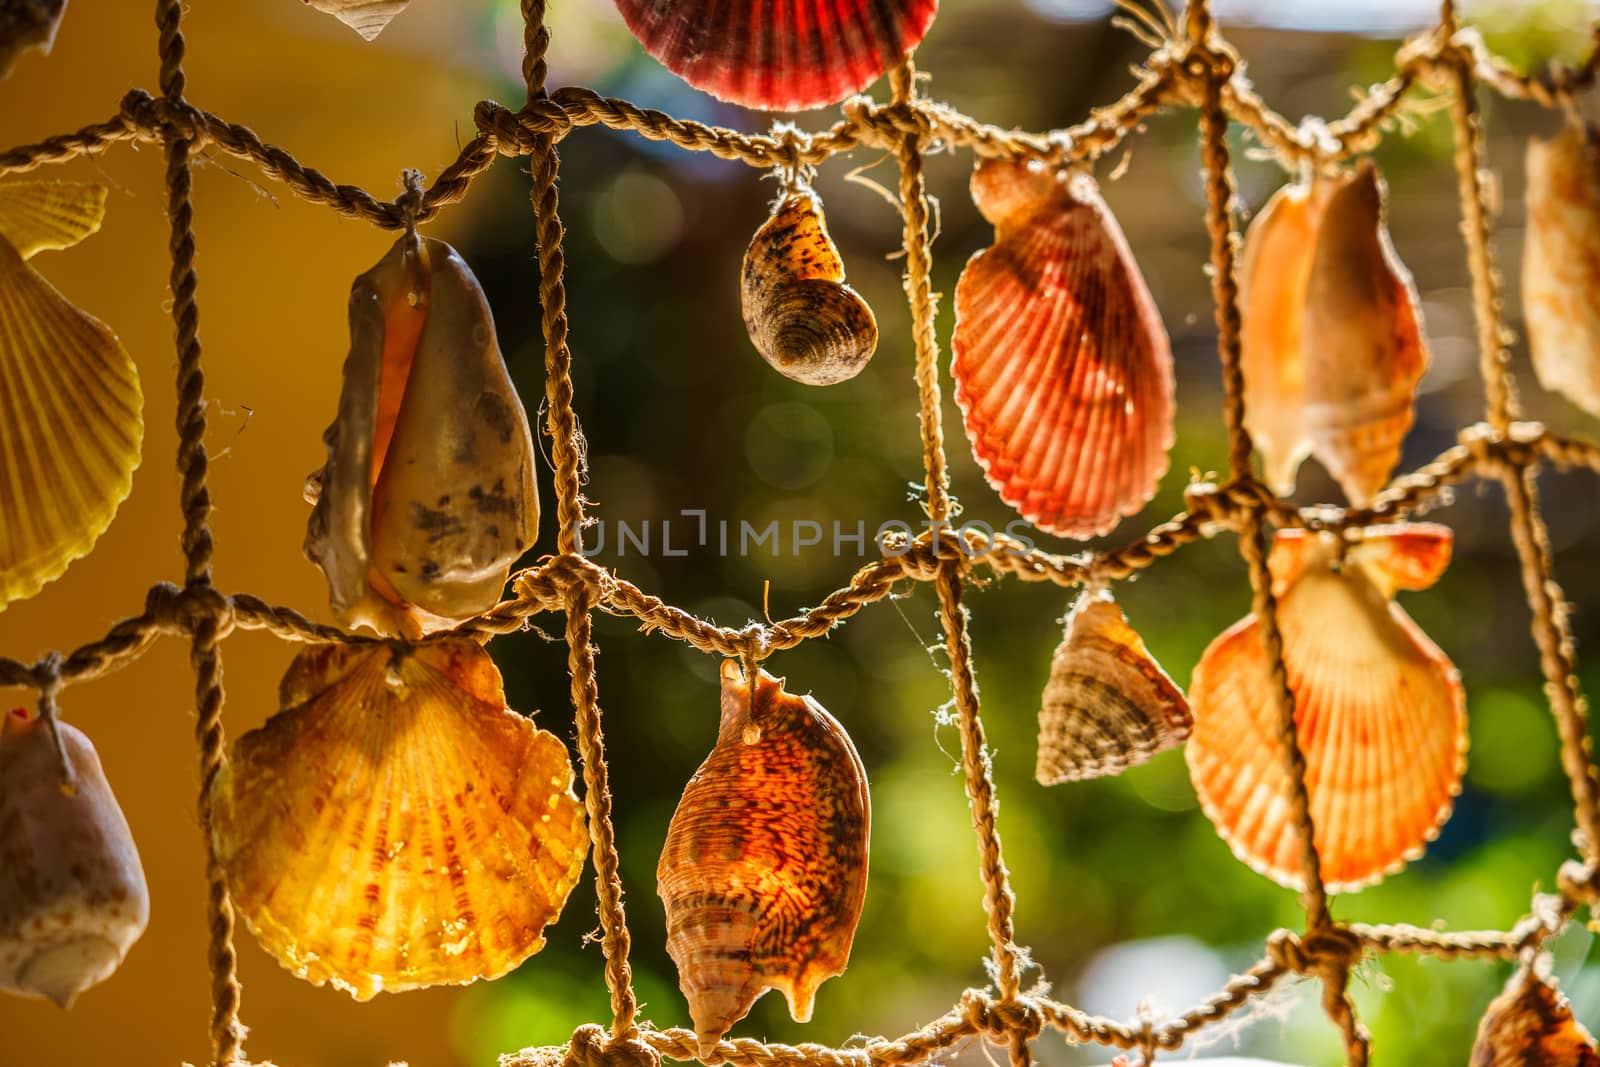 The element of the interior. Fishing net with shells braided into it, close-up.